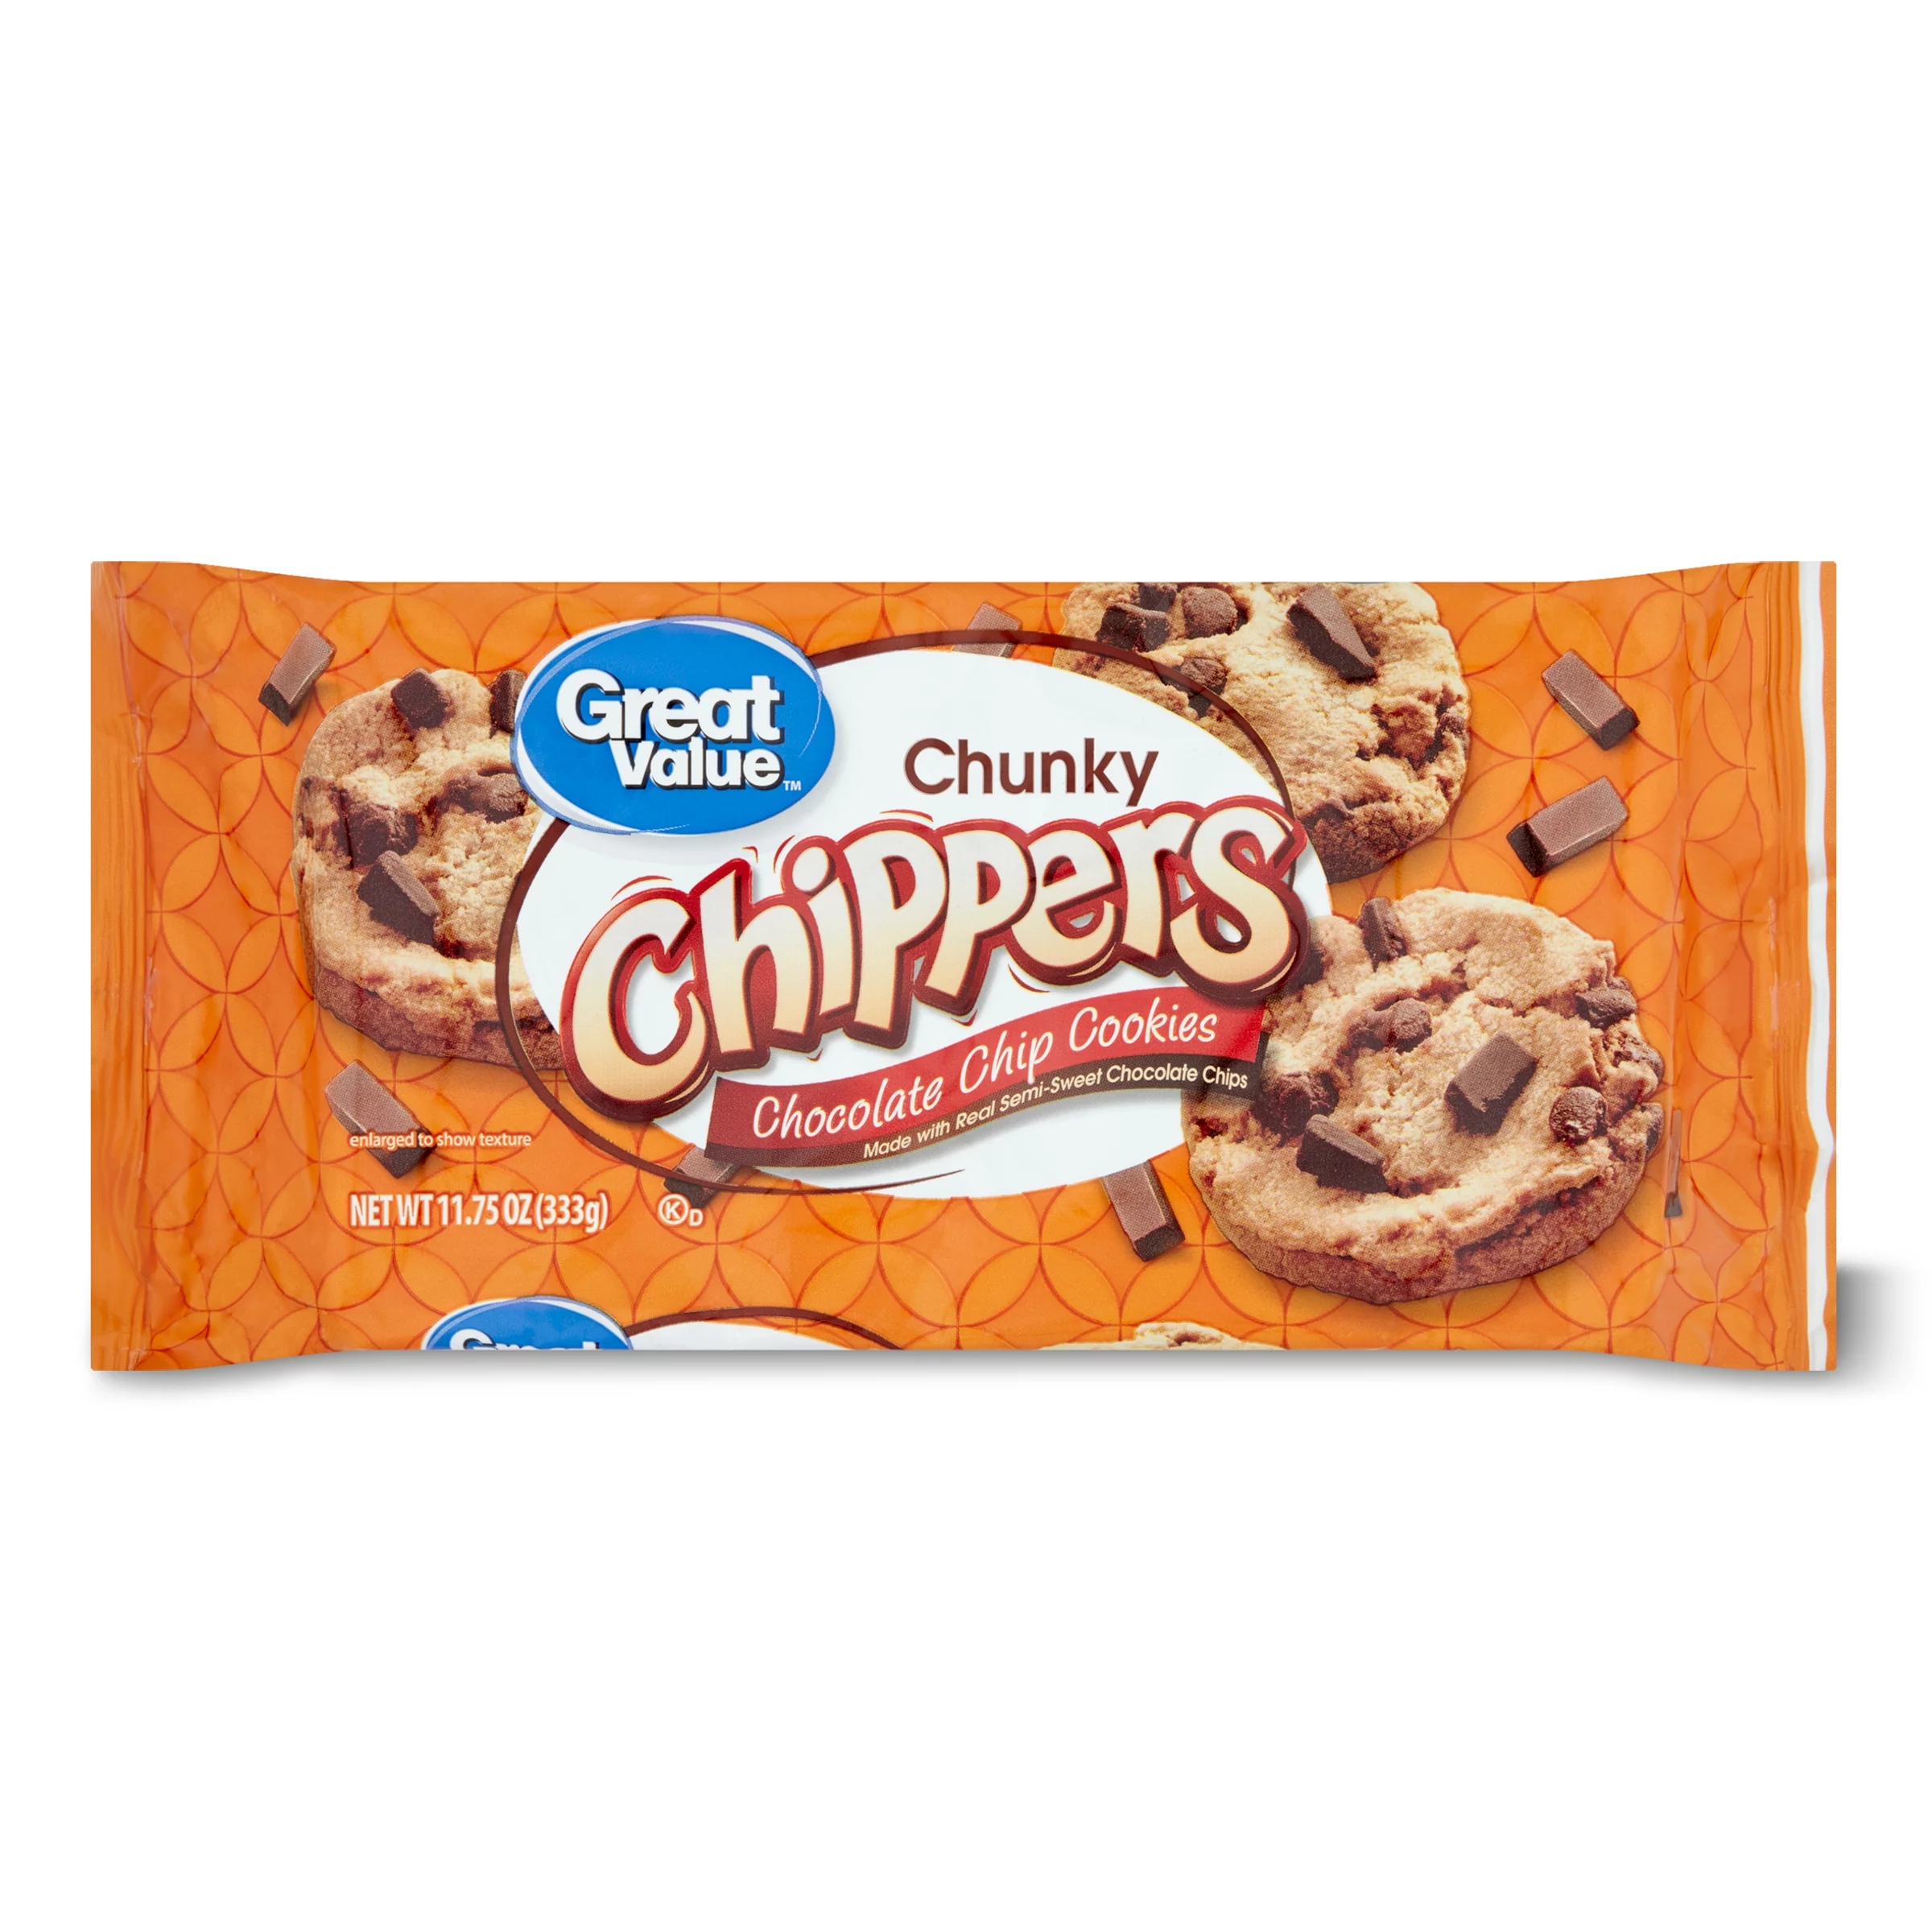 Great Value Chunky Chippers Chocolate Chip Cookies, 11.75 Oz